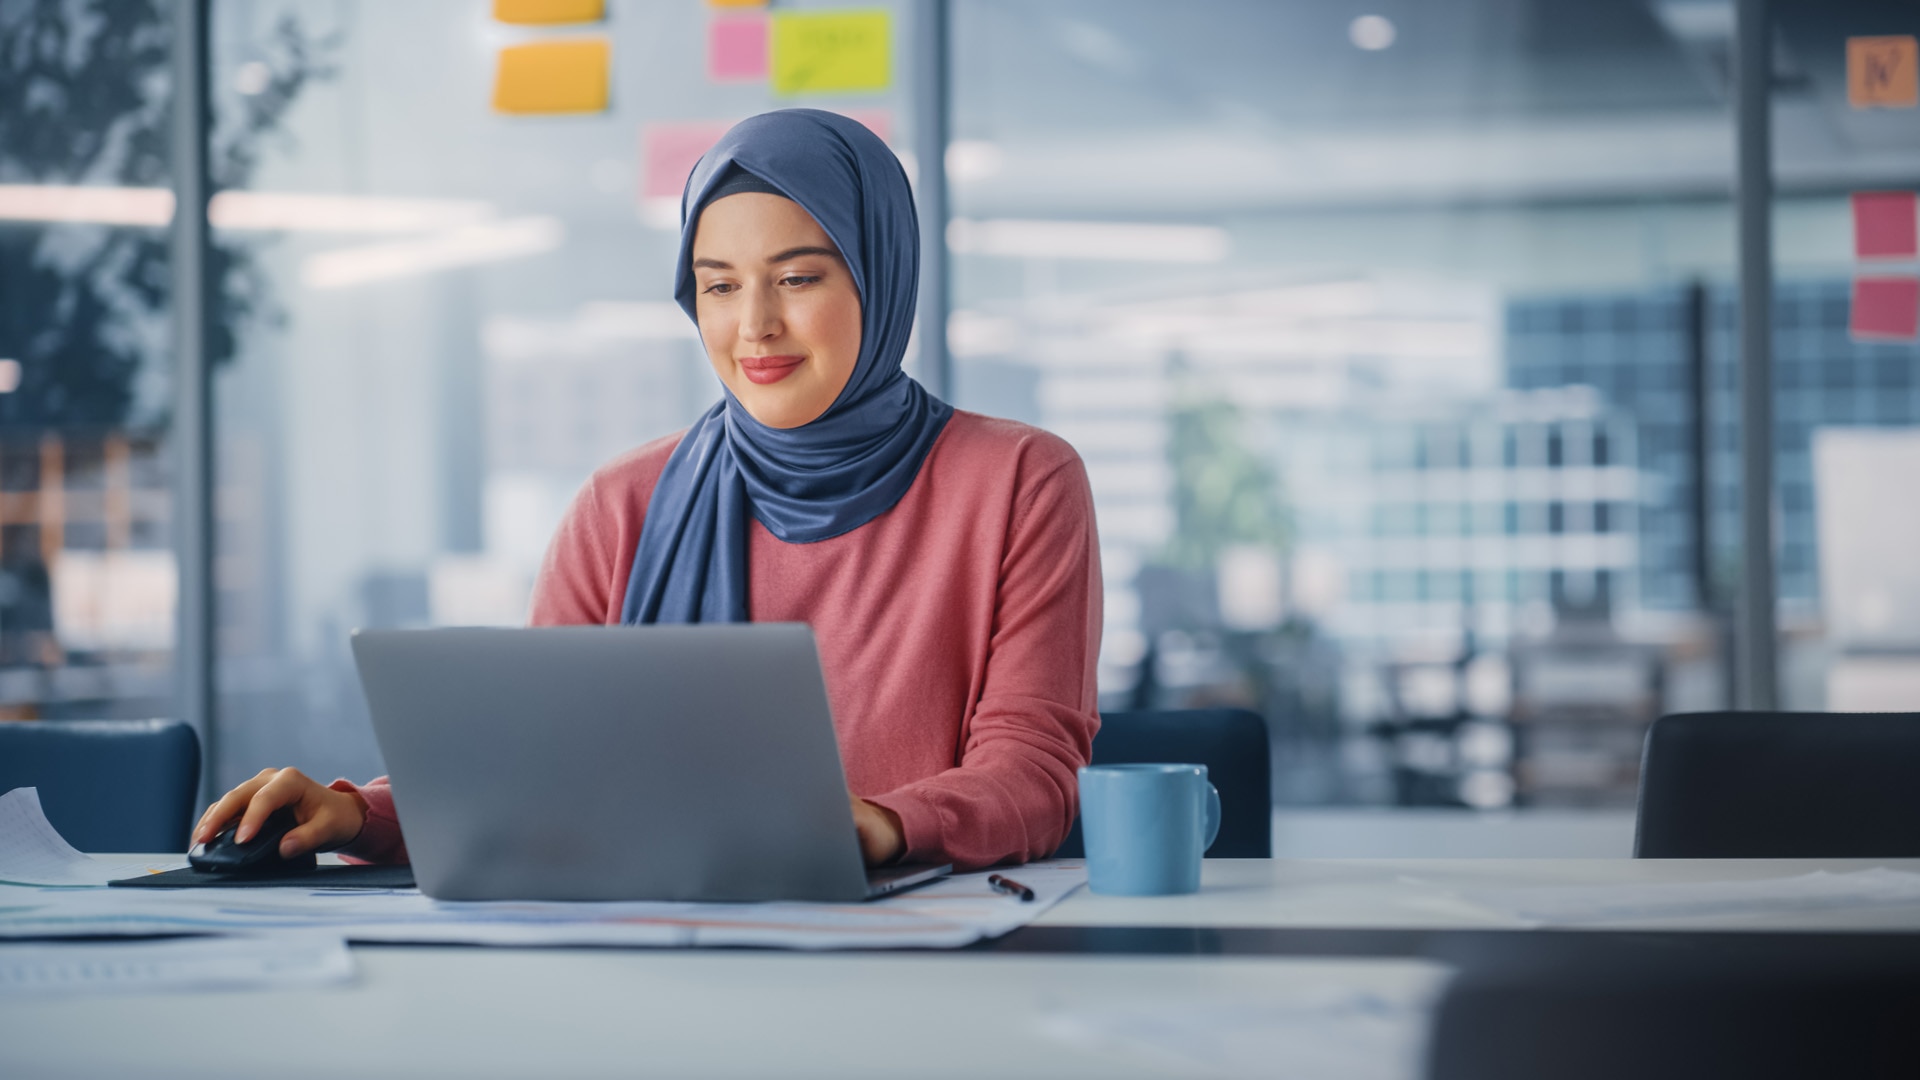 Modern Office: Portrait of Young Muslim Businesswoman Wearing Hijab Works on Laptop, Does Data Analysis, Website Design, Creative Development. Digital Entrepreneur Works on e-Commerce Startup Project; Shutterstock ID 2101929397; purchase_order: -; job: -; client: -; other: -